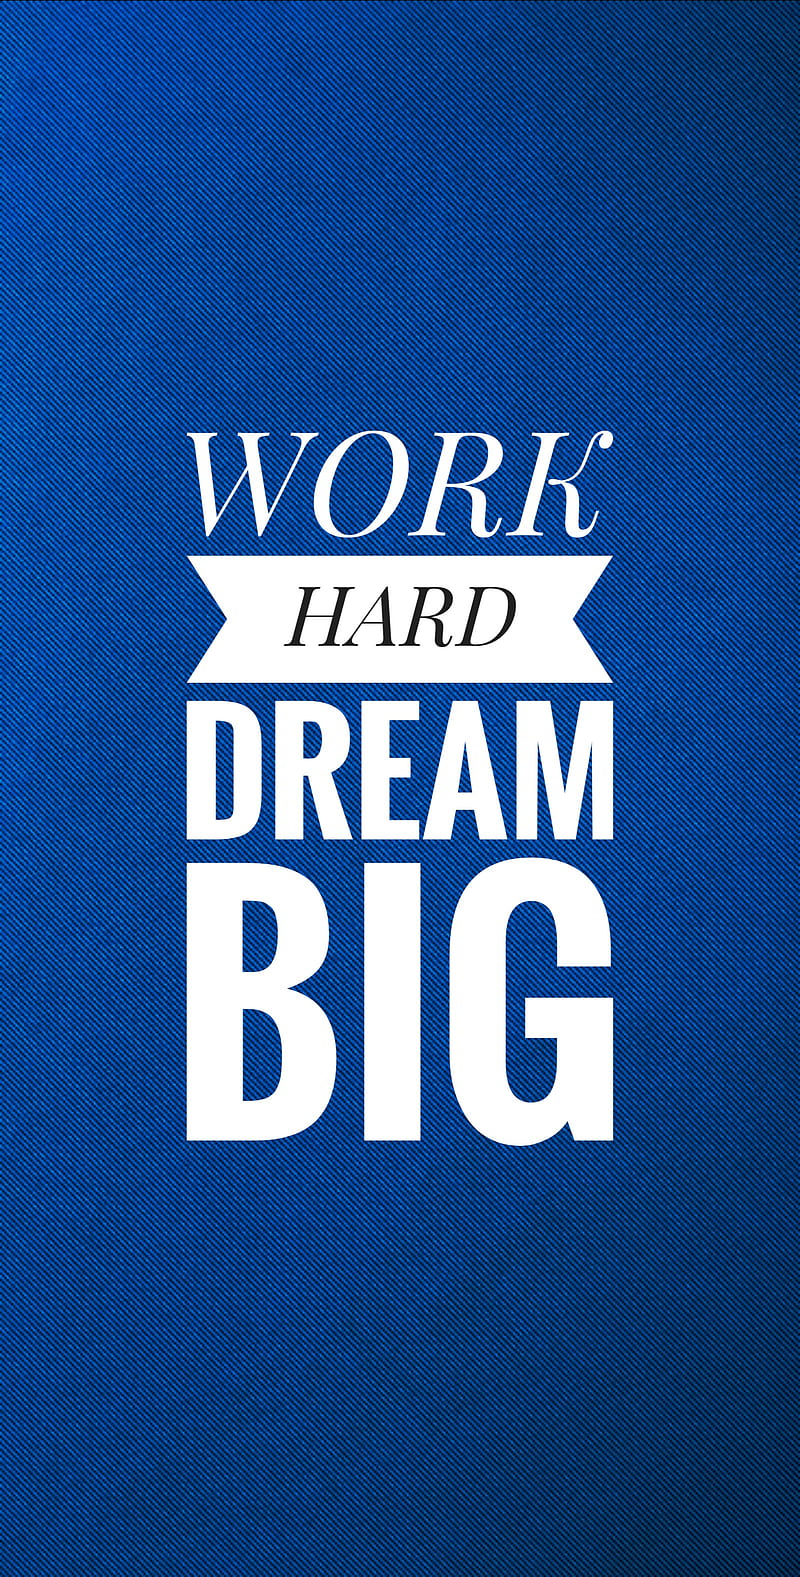 WORK HARD DREAM BIG, big, deep meaning quote, dream, hard, motivation, quote, work, HD phone wallpaper